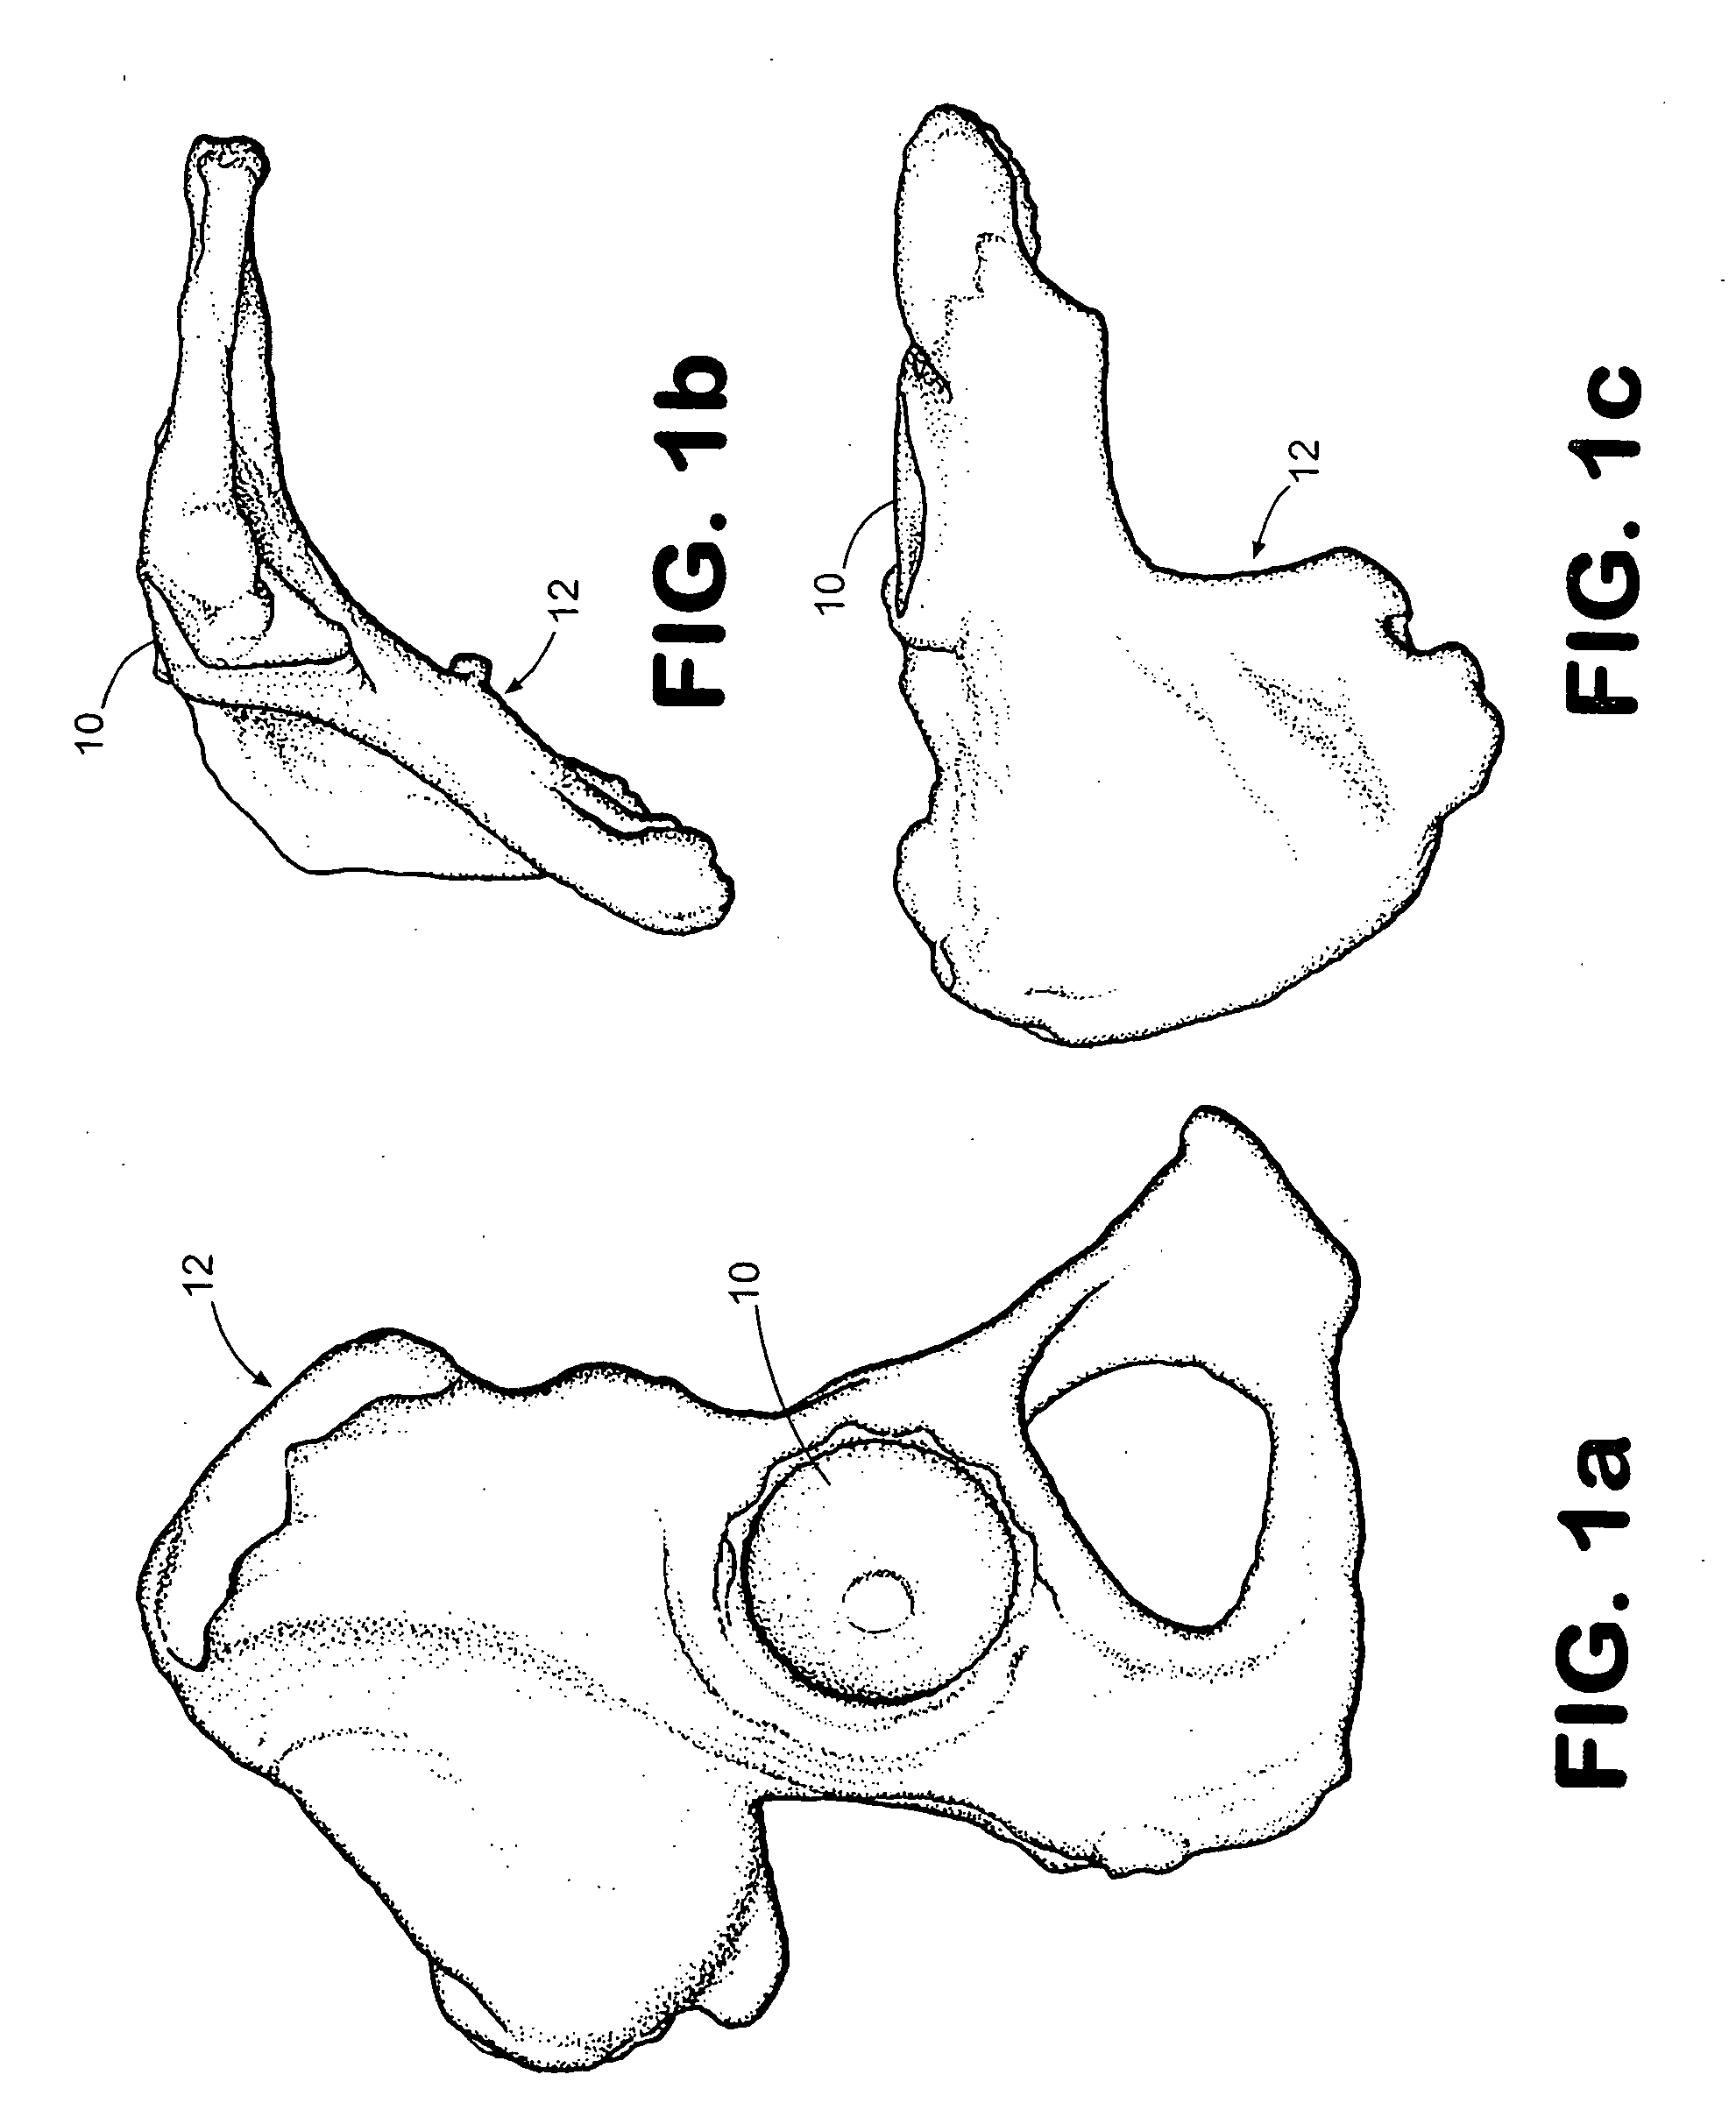 System and method of designing and manufacturing customized instrumentation for accurate implantation of prosthesis by utilizing computed tomography data